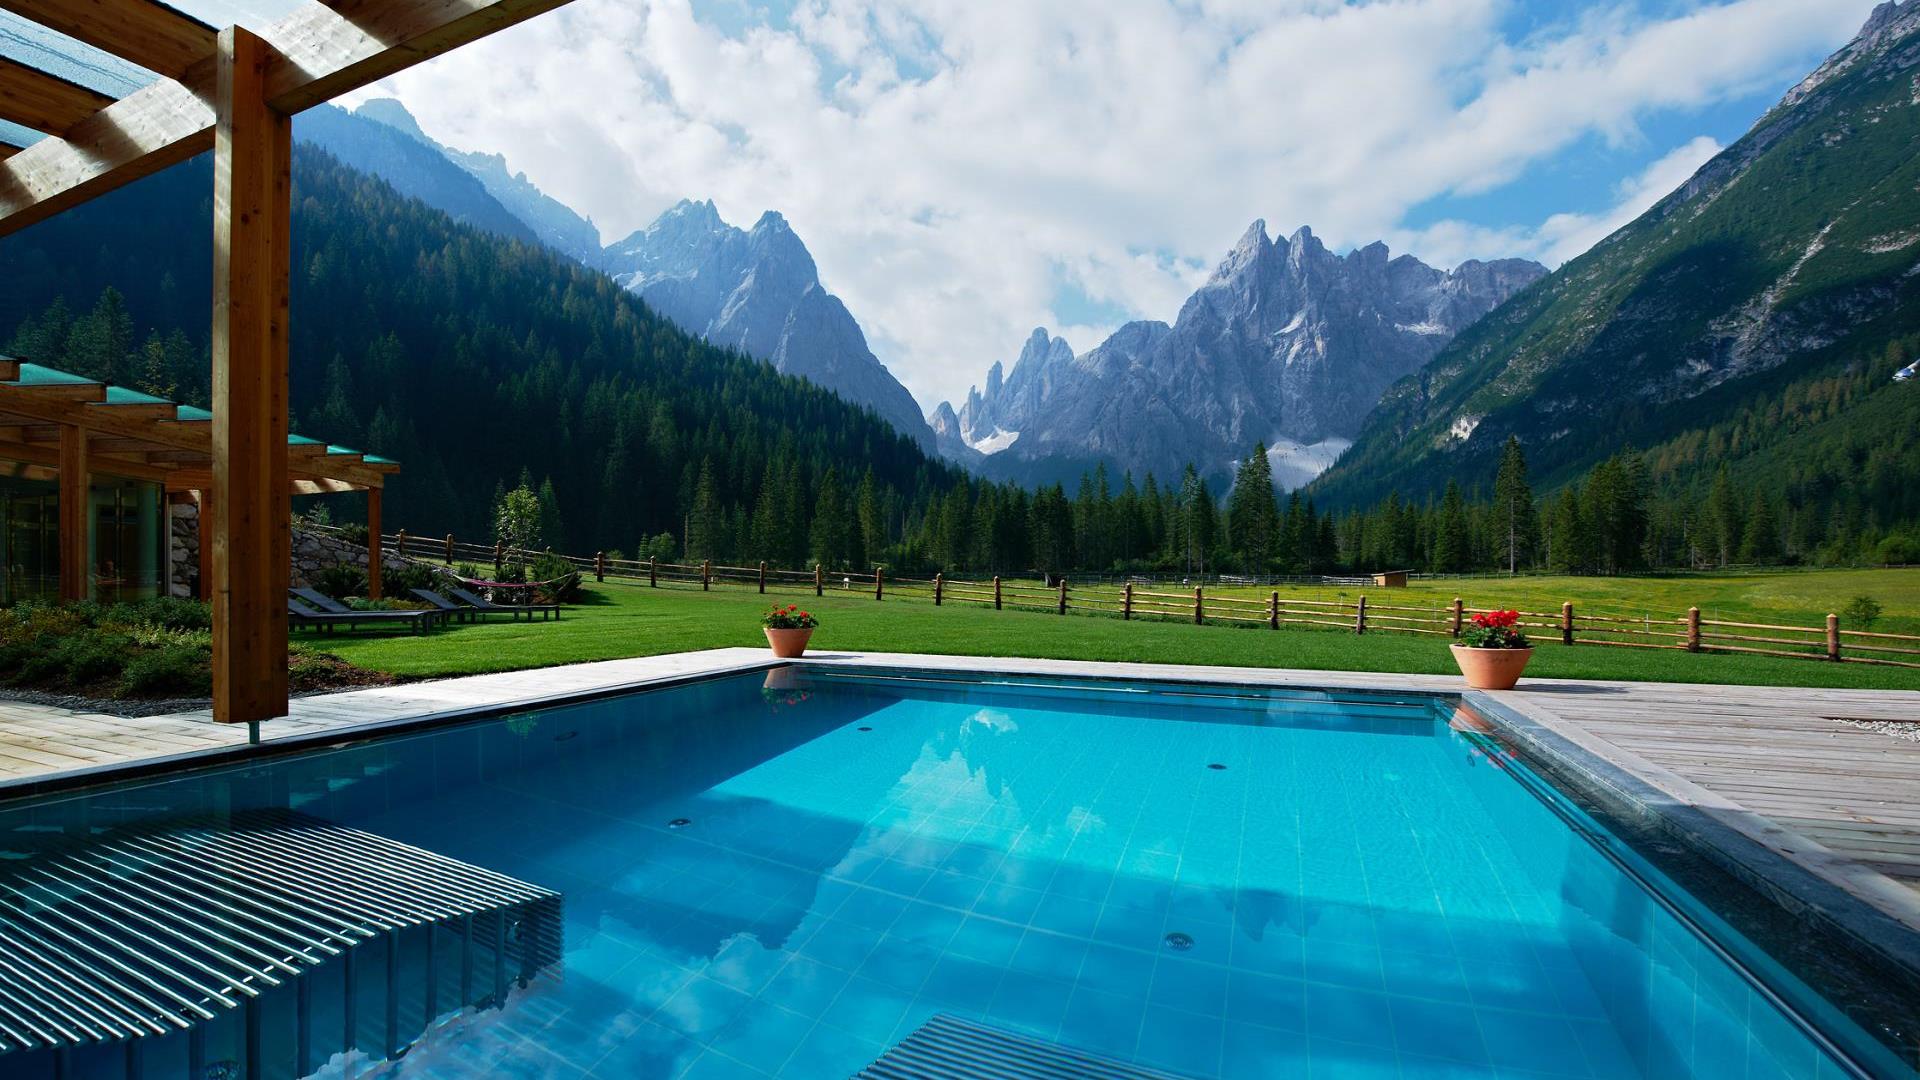 The outdoor pool with whirlpool benches and a view on the Dolomites